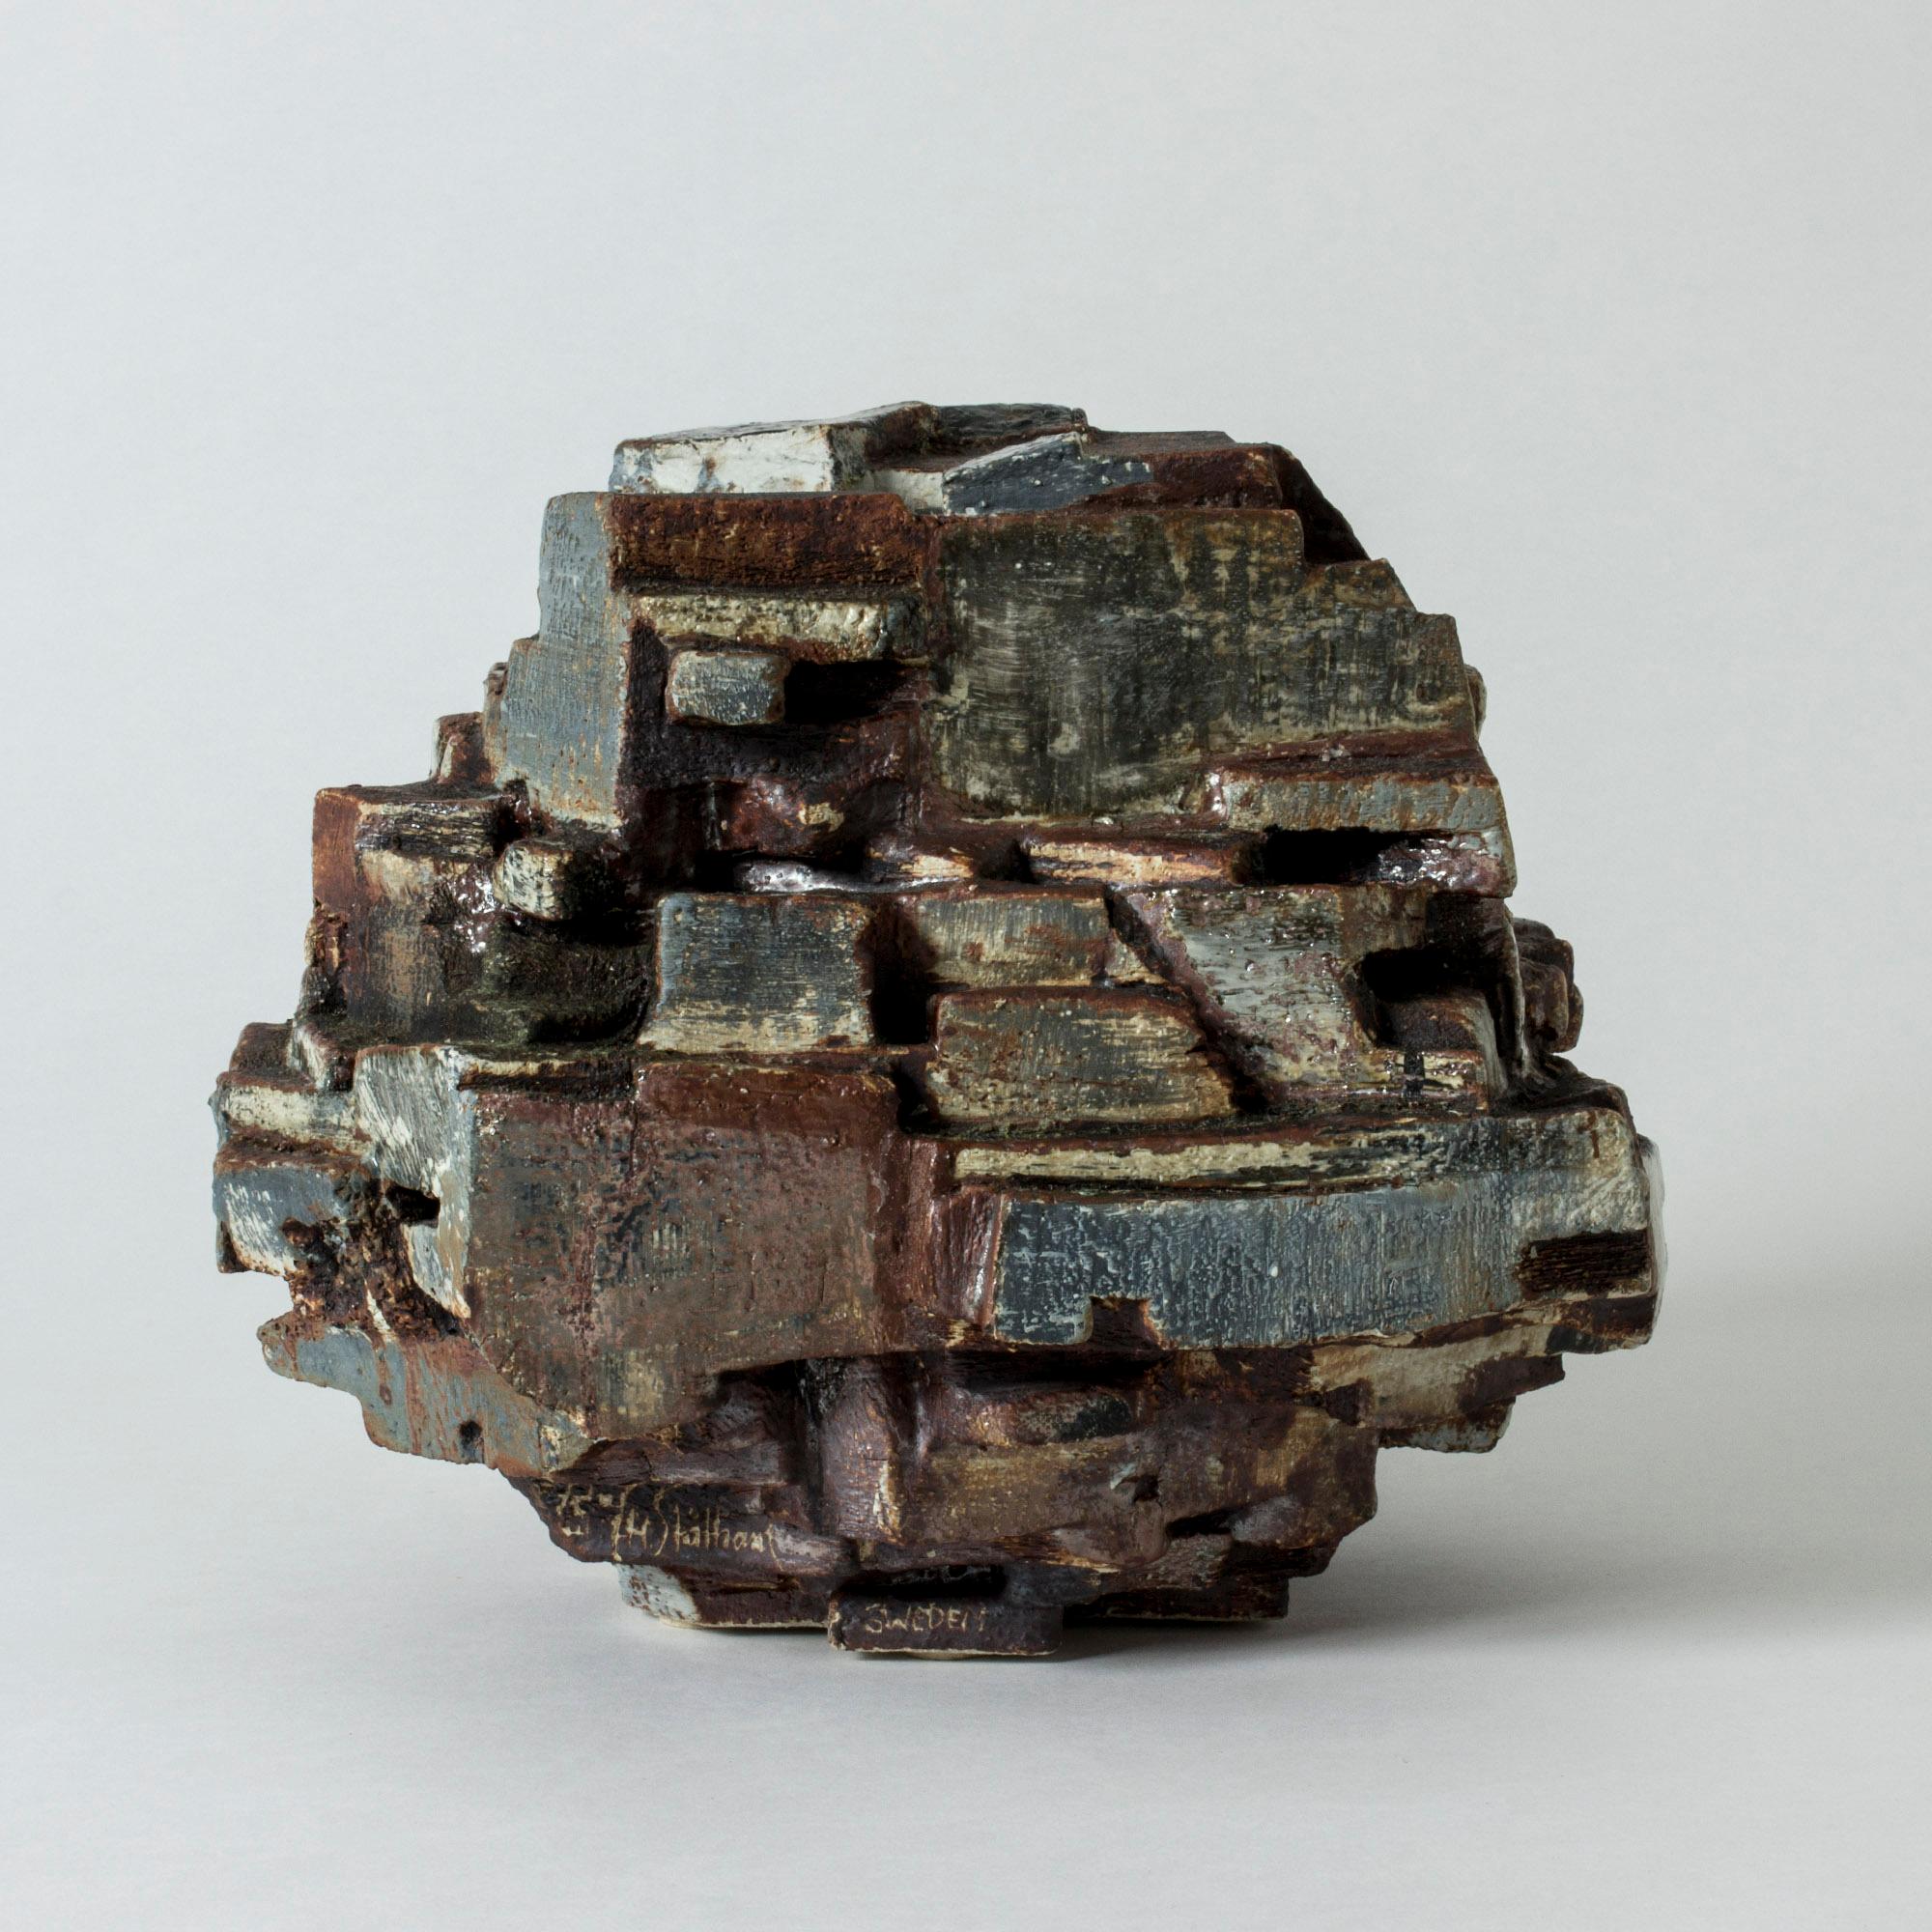 Imposing stoneware sculpture by Carl-Harry Stålhane, named “Borgen”, meaning “The Castle”, with a powerful and dense expression. Alternating glazed and unglazed areas, rough surfaces and earthy colors. Associations to bark, rock, iron and frozen